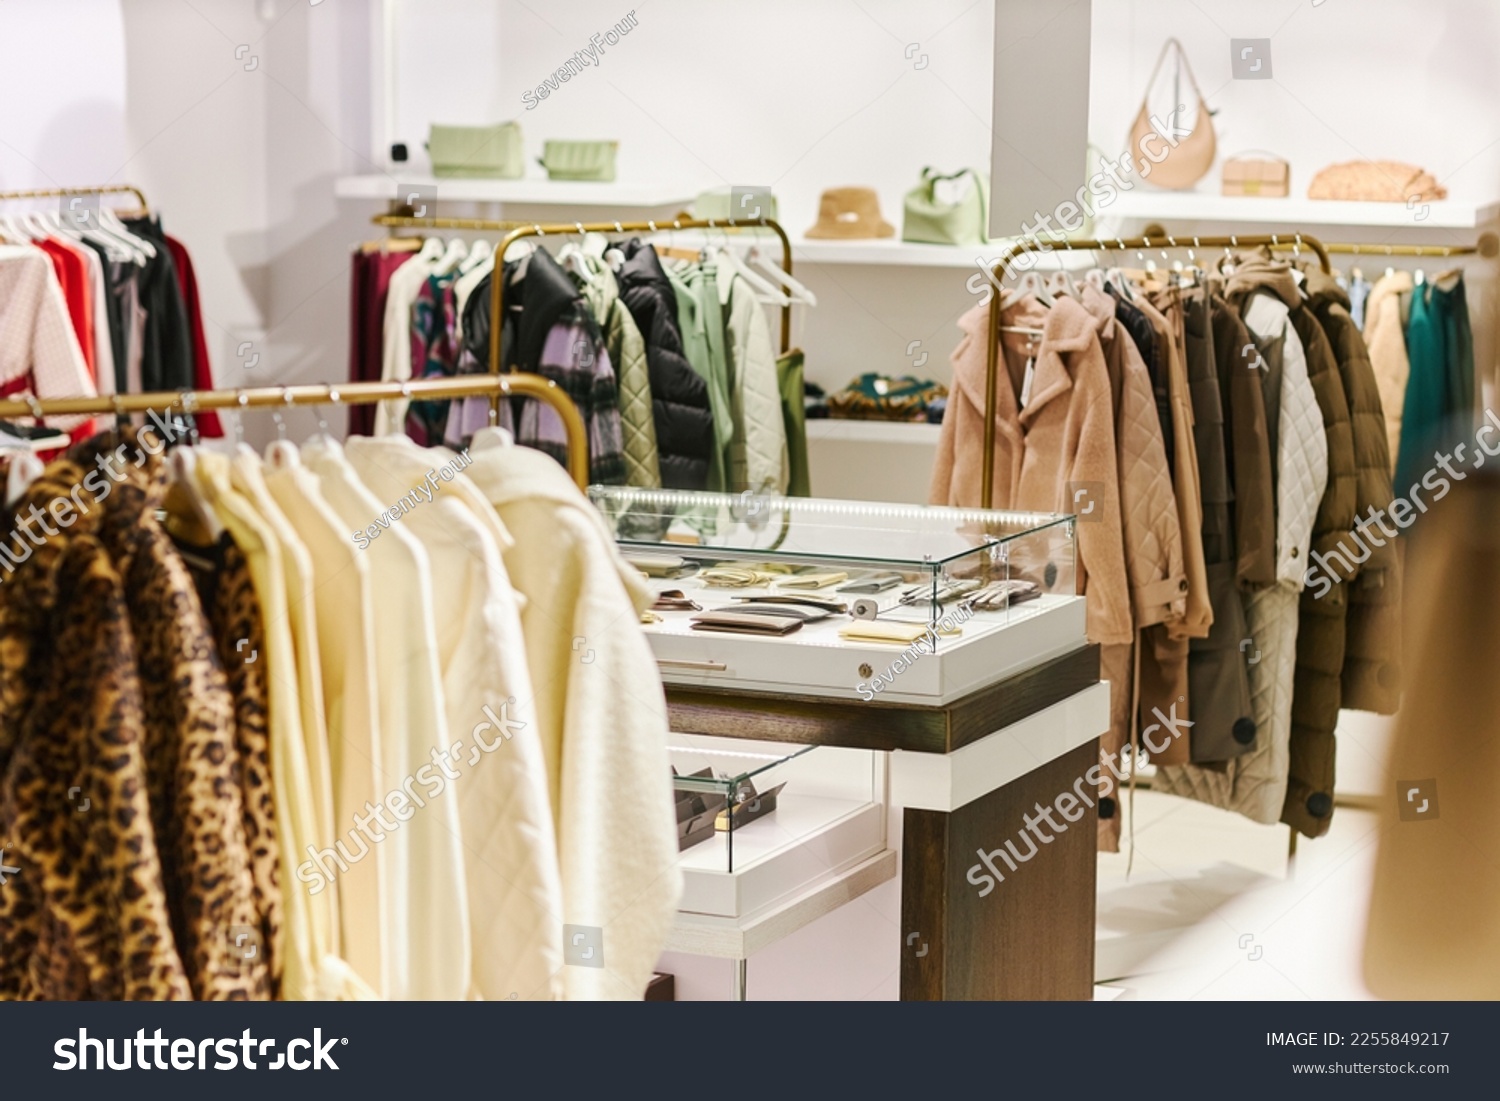 Background image of luxury boutique interior at shopping mall with clothes on hangers, copy space #2255849217